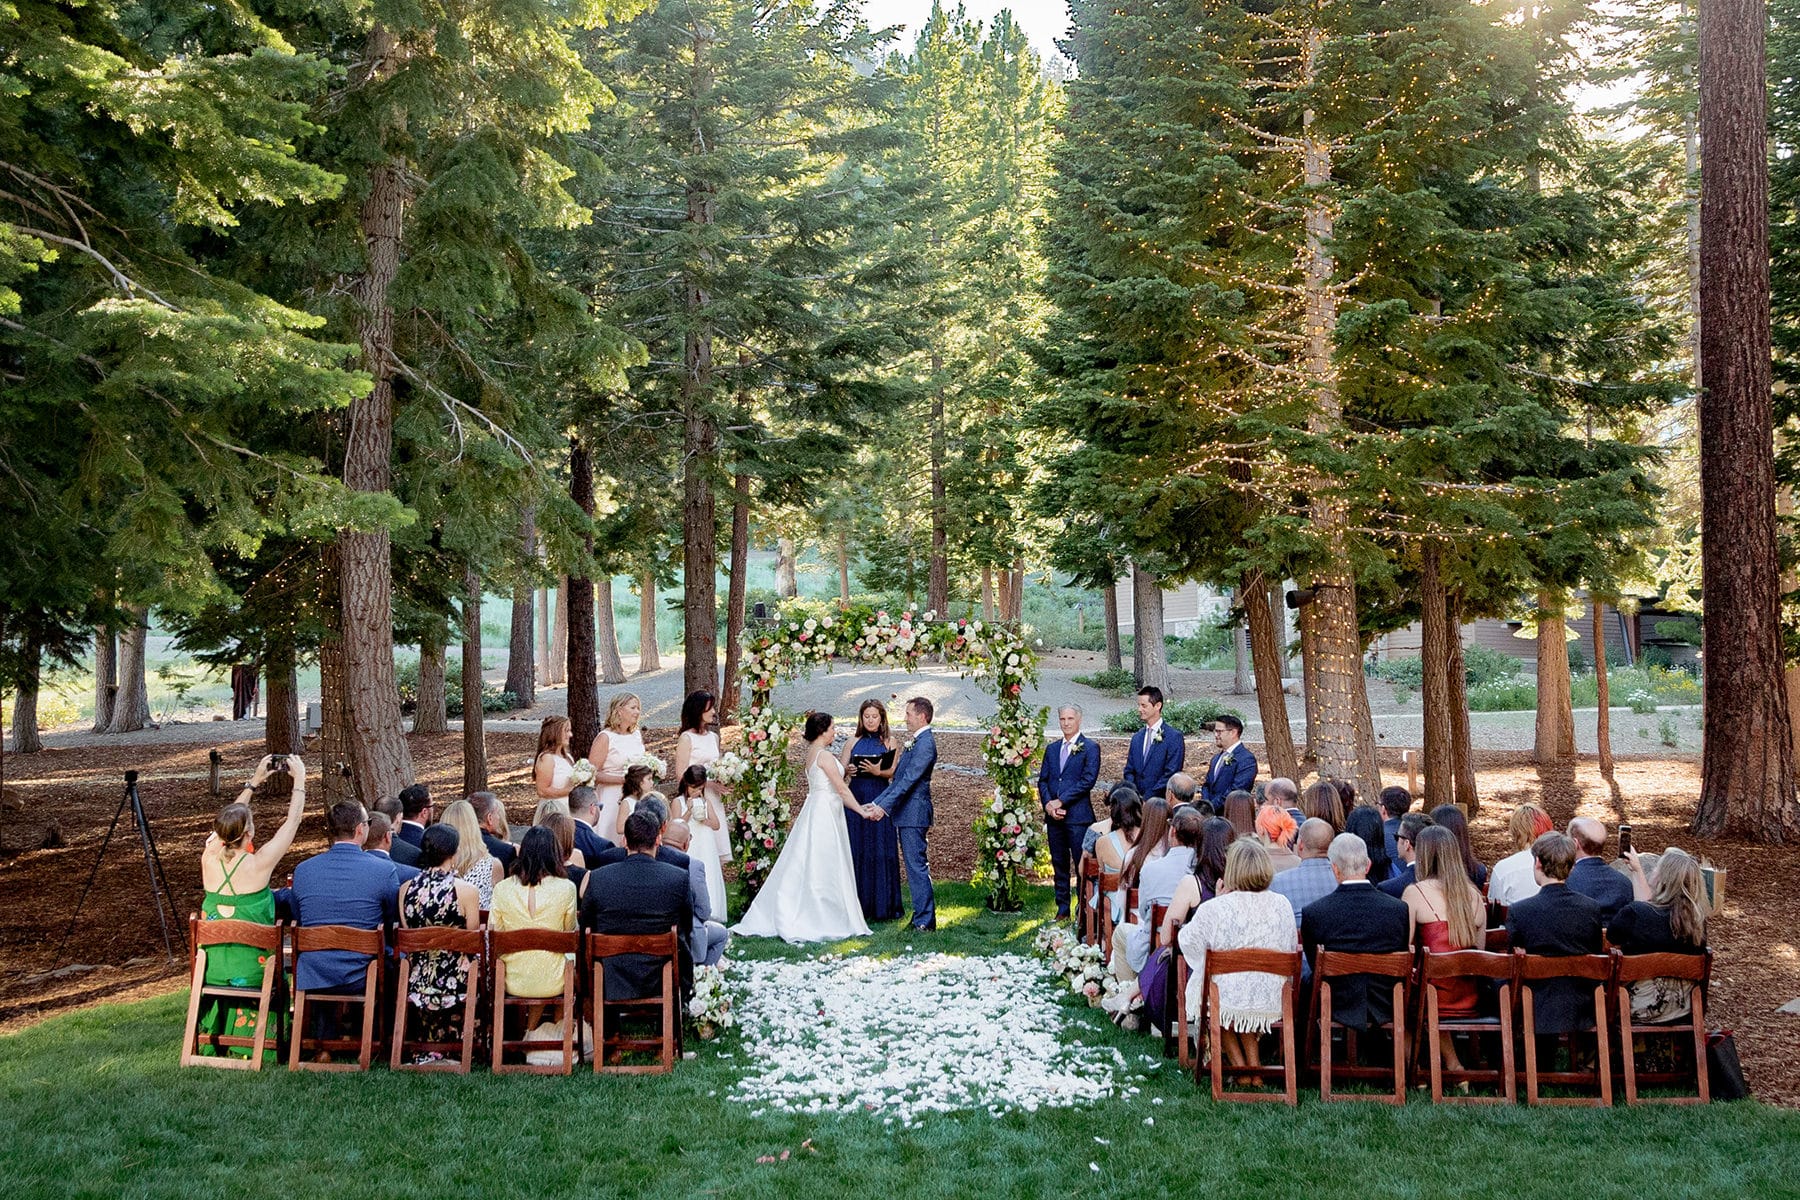 Wedding at the Ritz-Carlton Highlands in Truckee, CA. The bride and groom are standing at the altar during their ceremony at the Woods site.